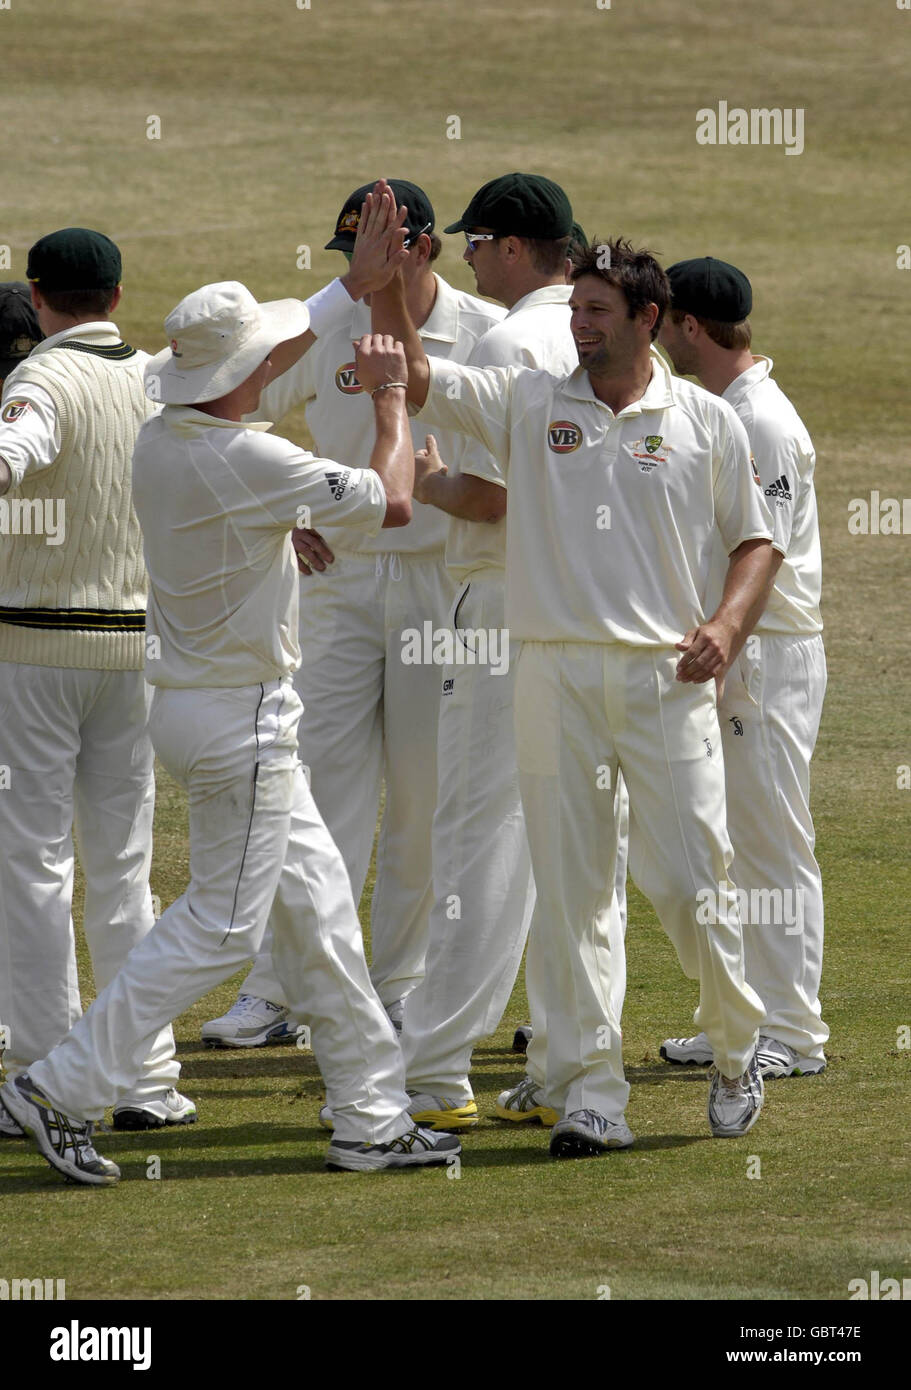 The Australian team celebrate after taking the wicket of Sussex's Michael Yardy (not pictured) off the bowling of Australia's Ben Hilfenhaus (second right) during the tour match at the County Ground, Sussex. Stock Photo